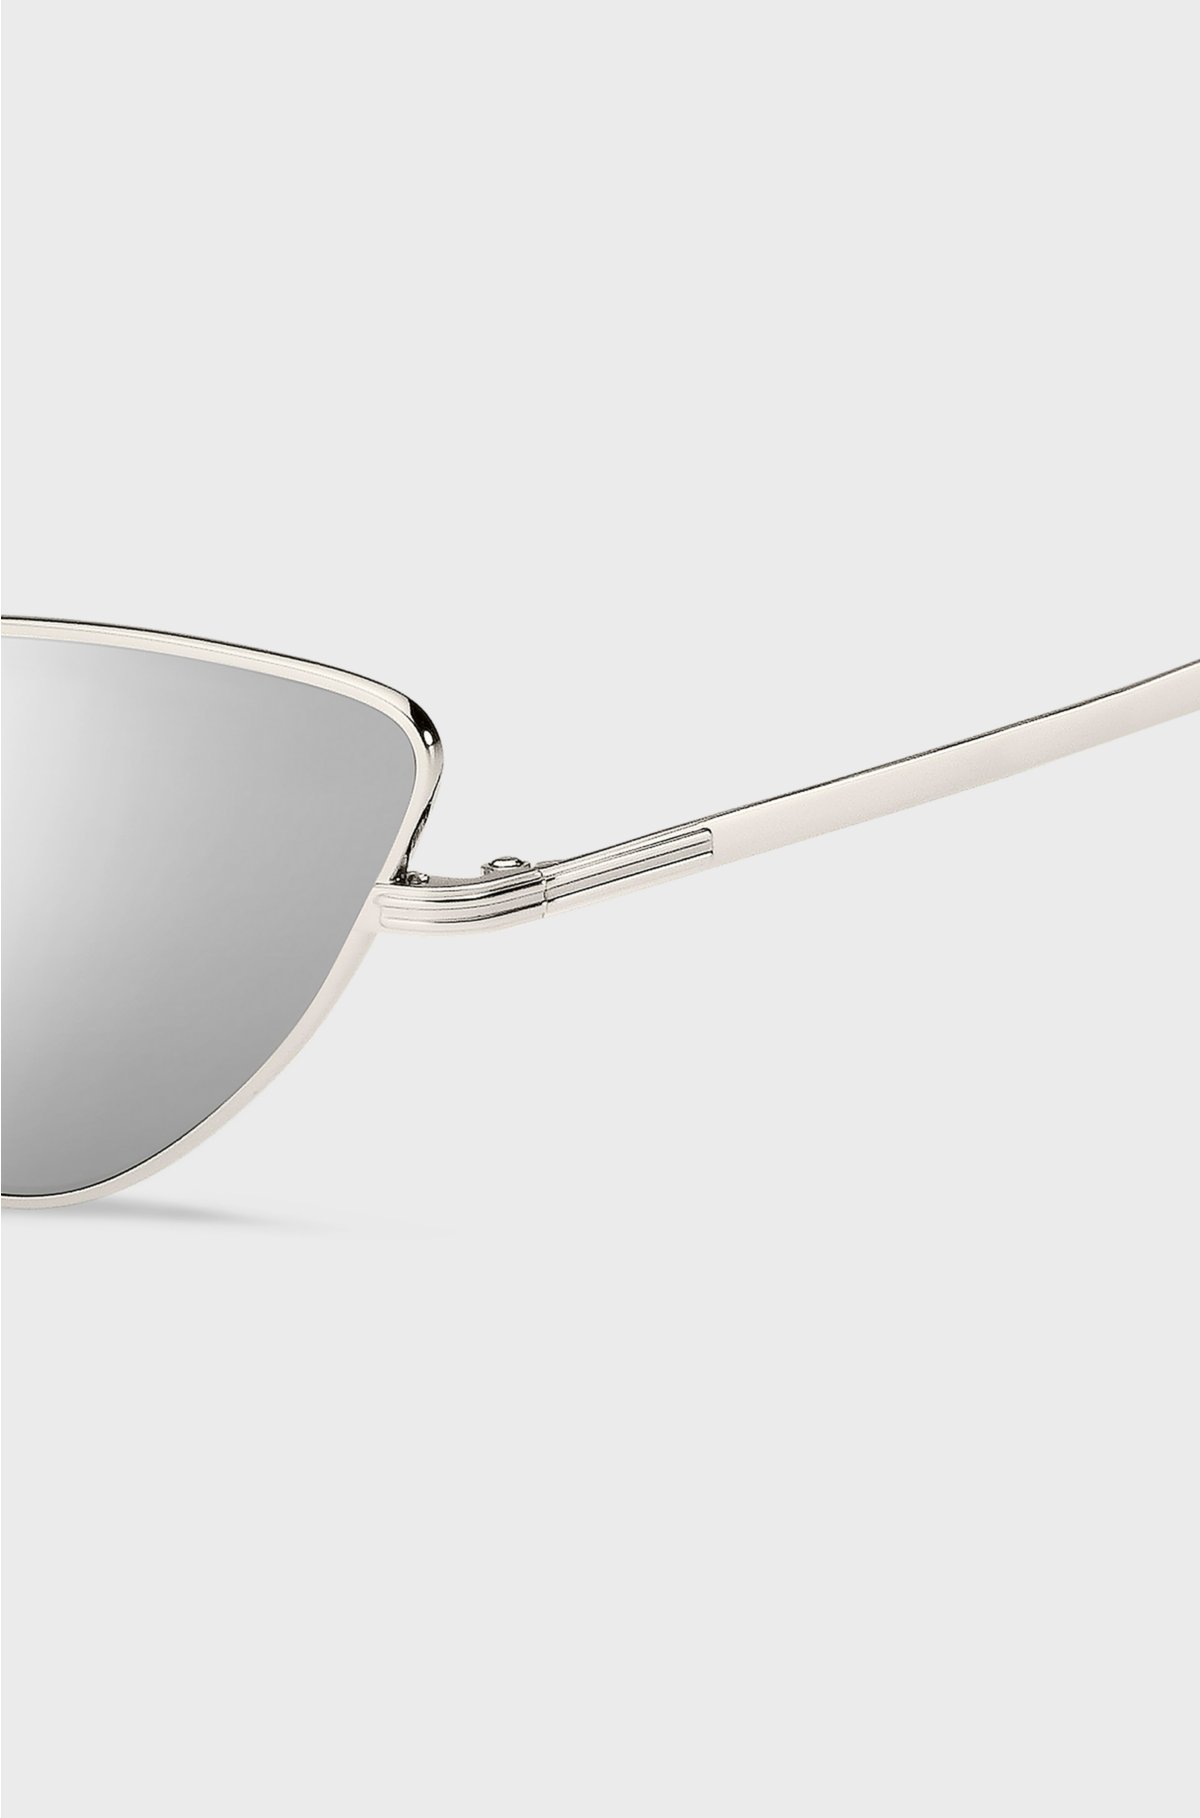 Cat-eye sunglasses in steel with signature details, Silver